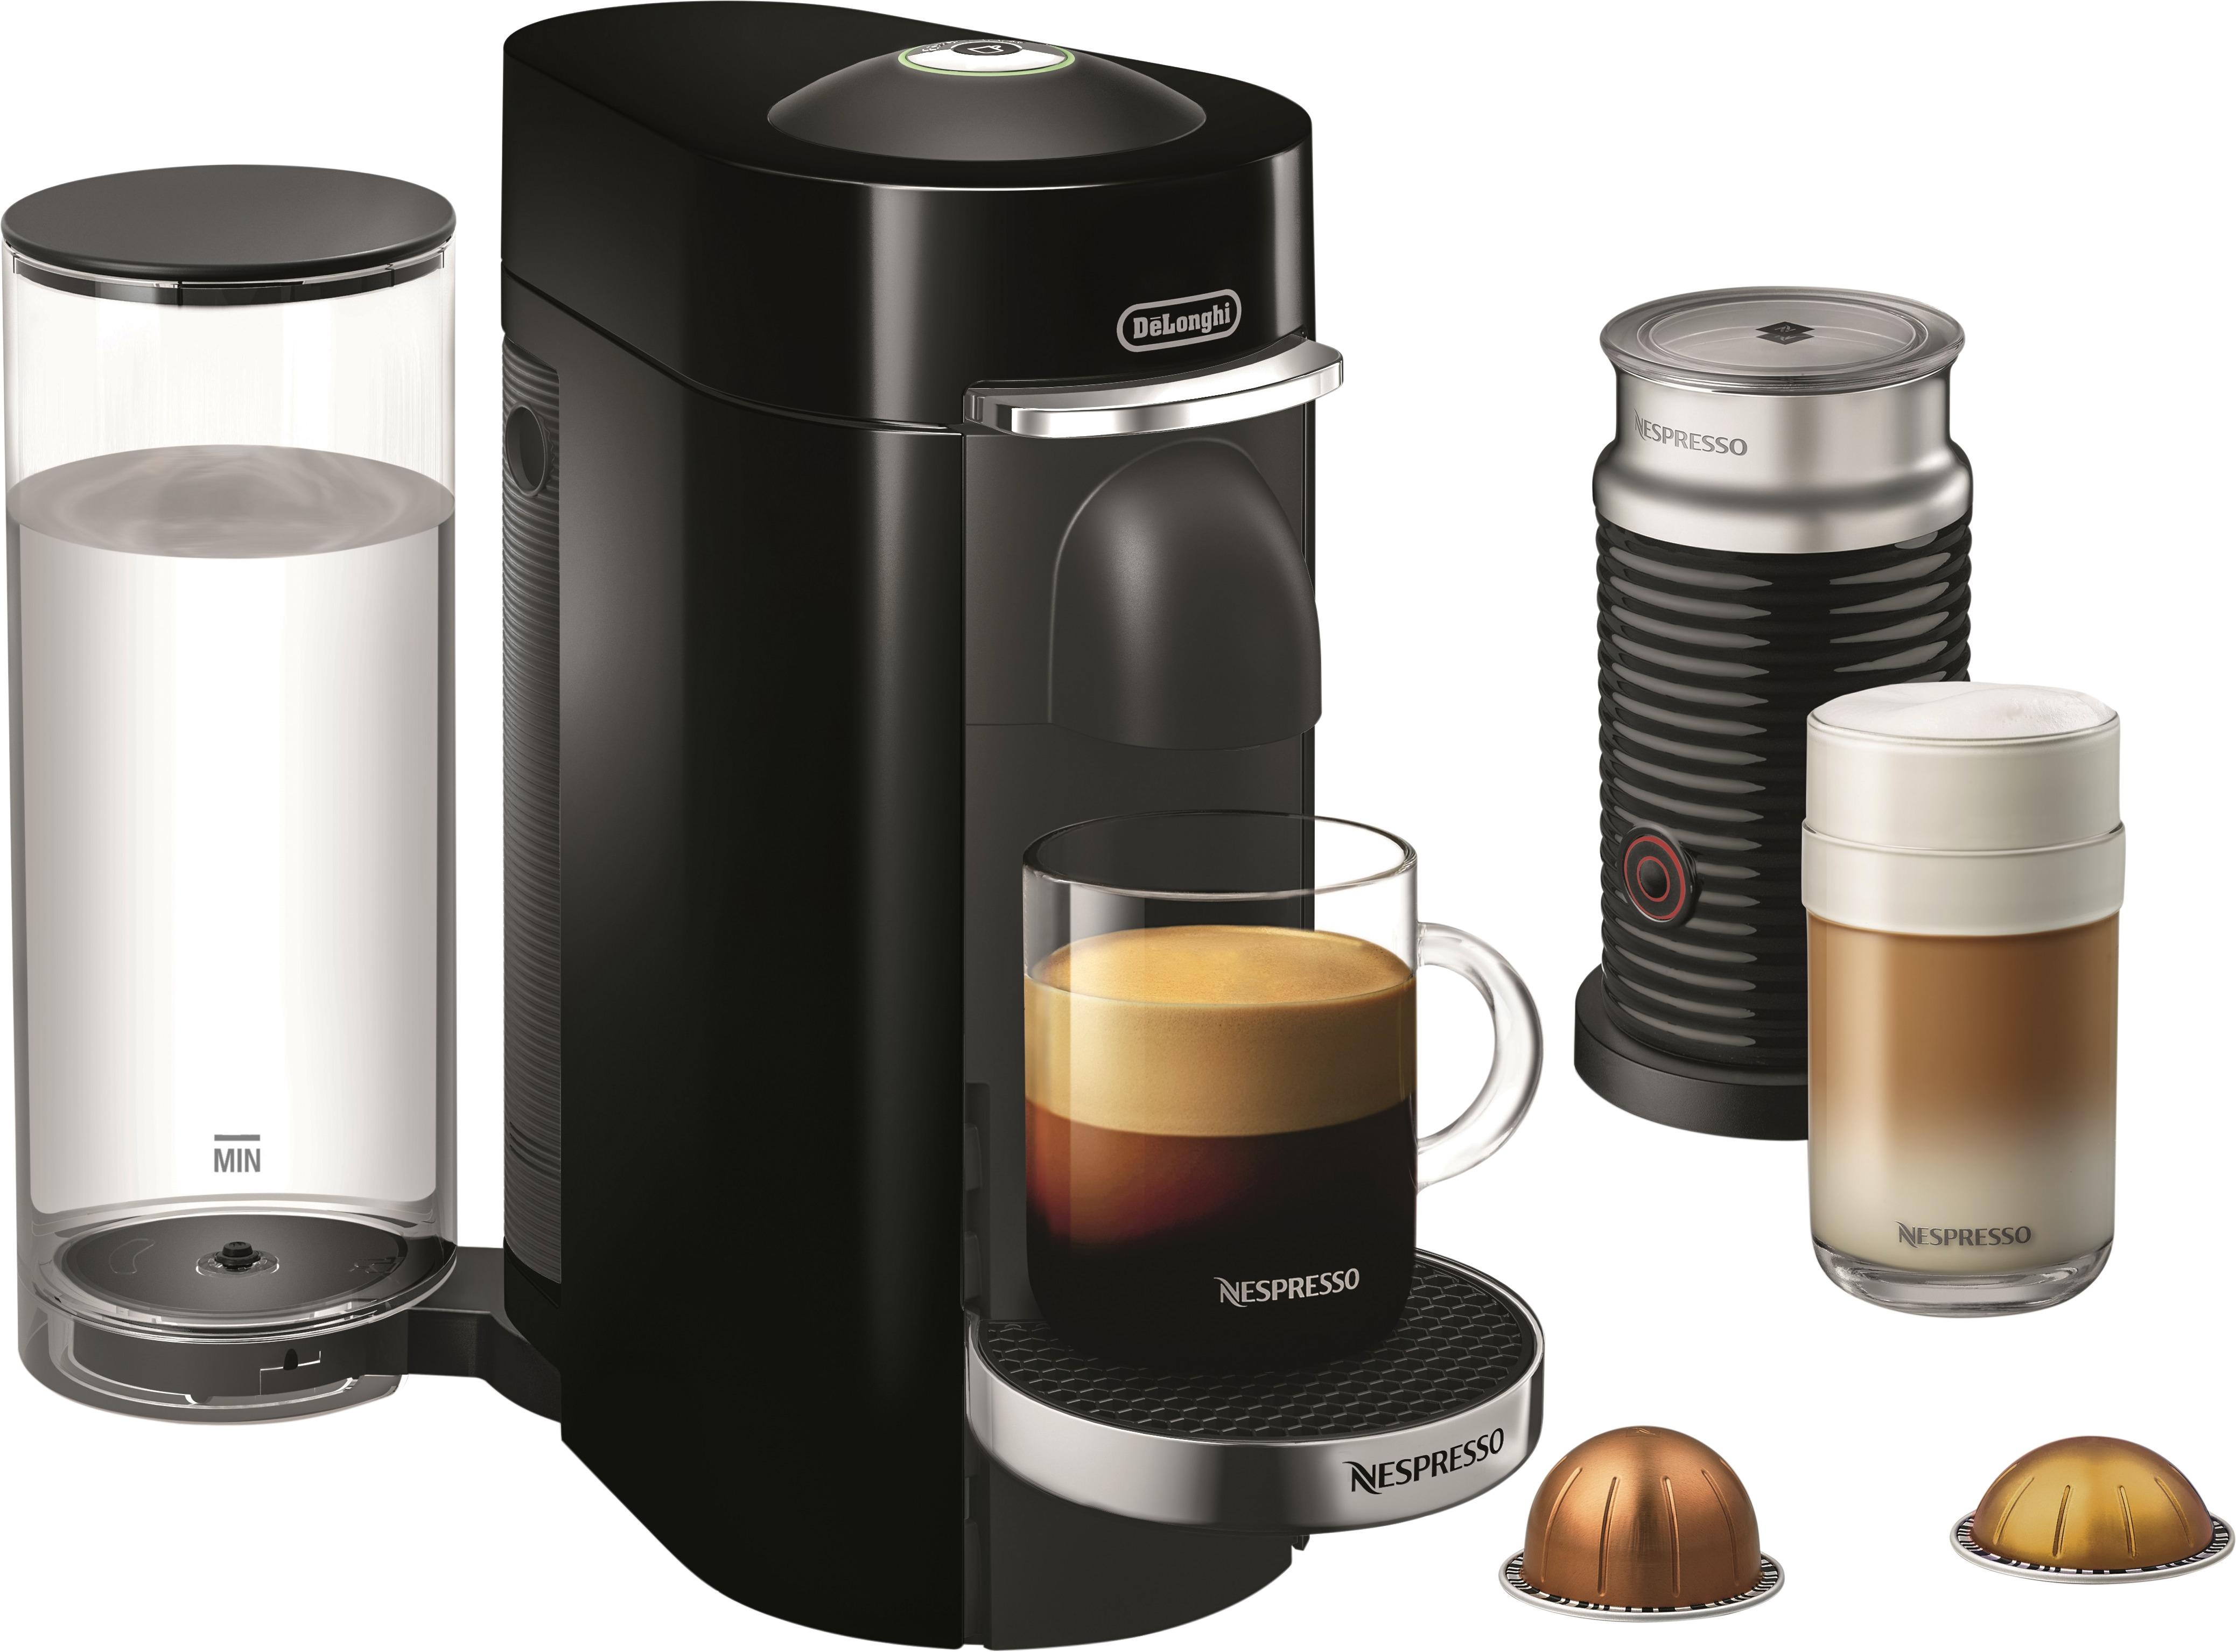 Nespresso Vertuoplus Deluxe Coffee Maker And Espresso Machine With Aeroccino Milk Frother By Delonghi Piano Black Env155bae Best Buy,Fried Dumplings Drawing